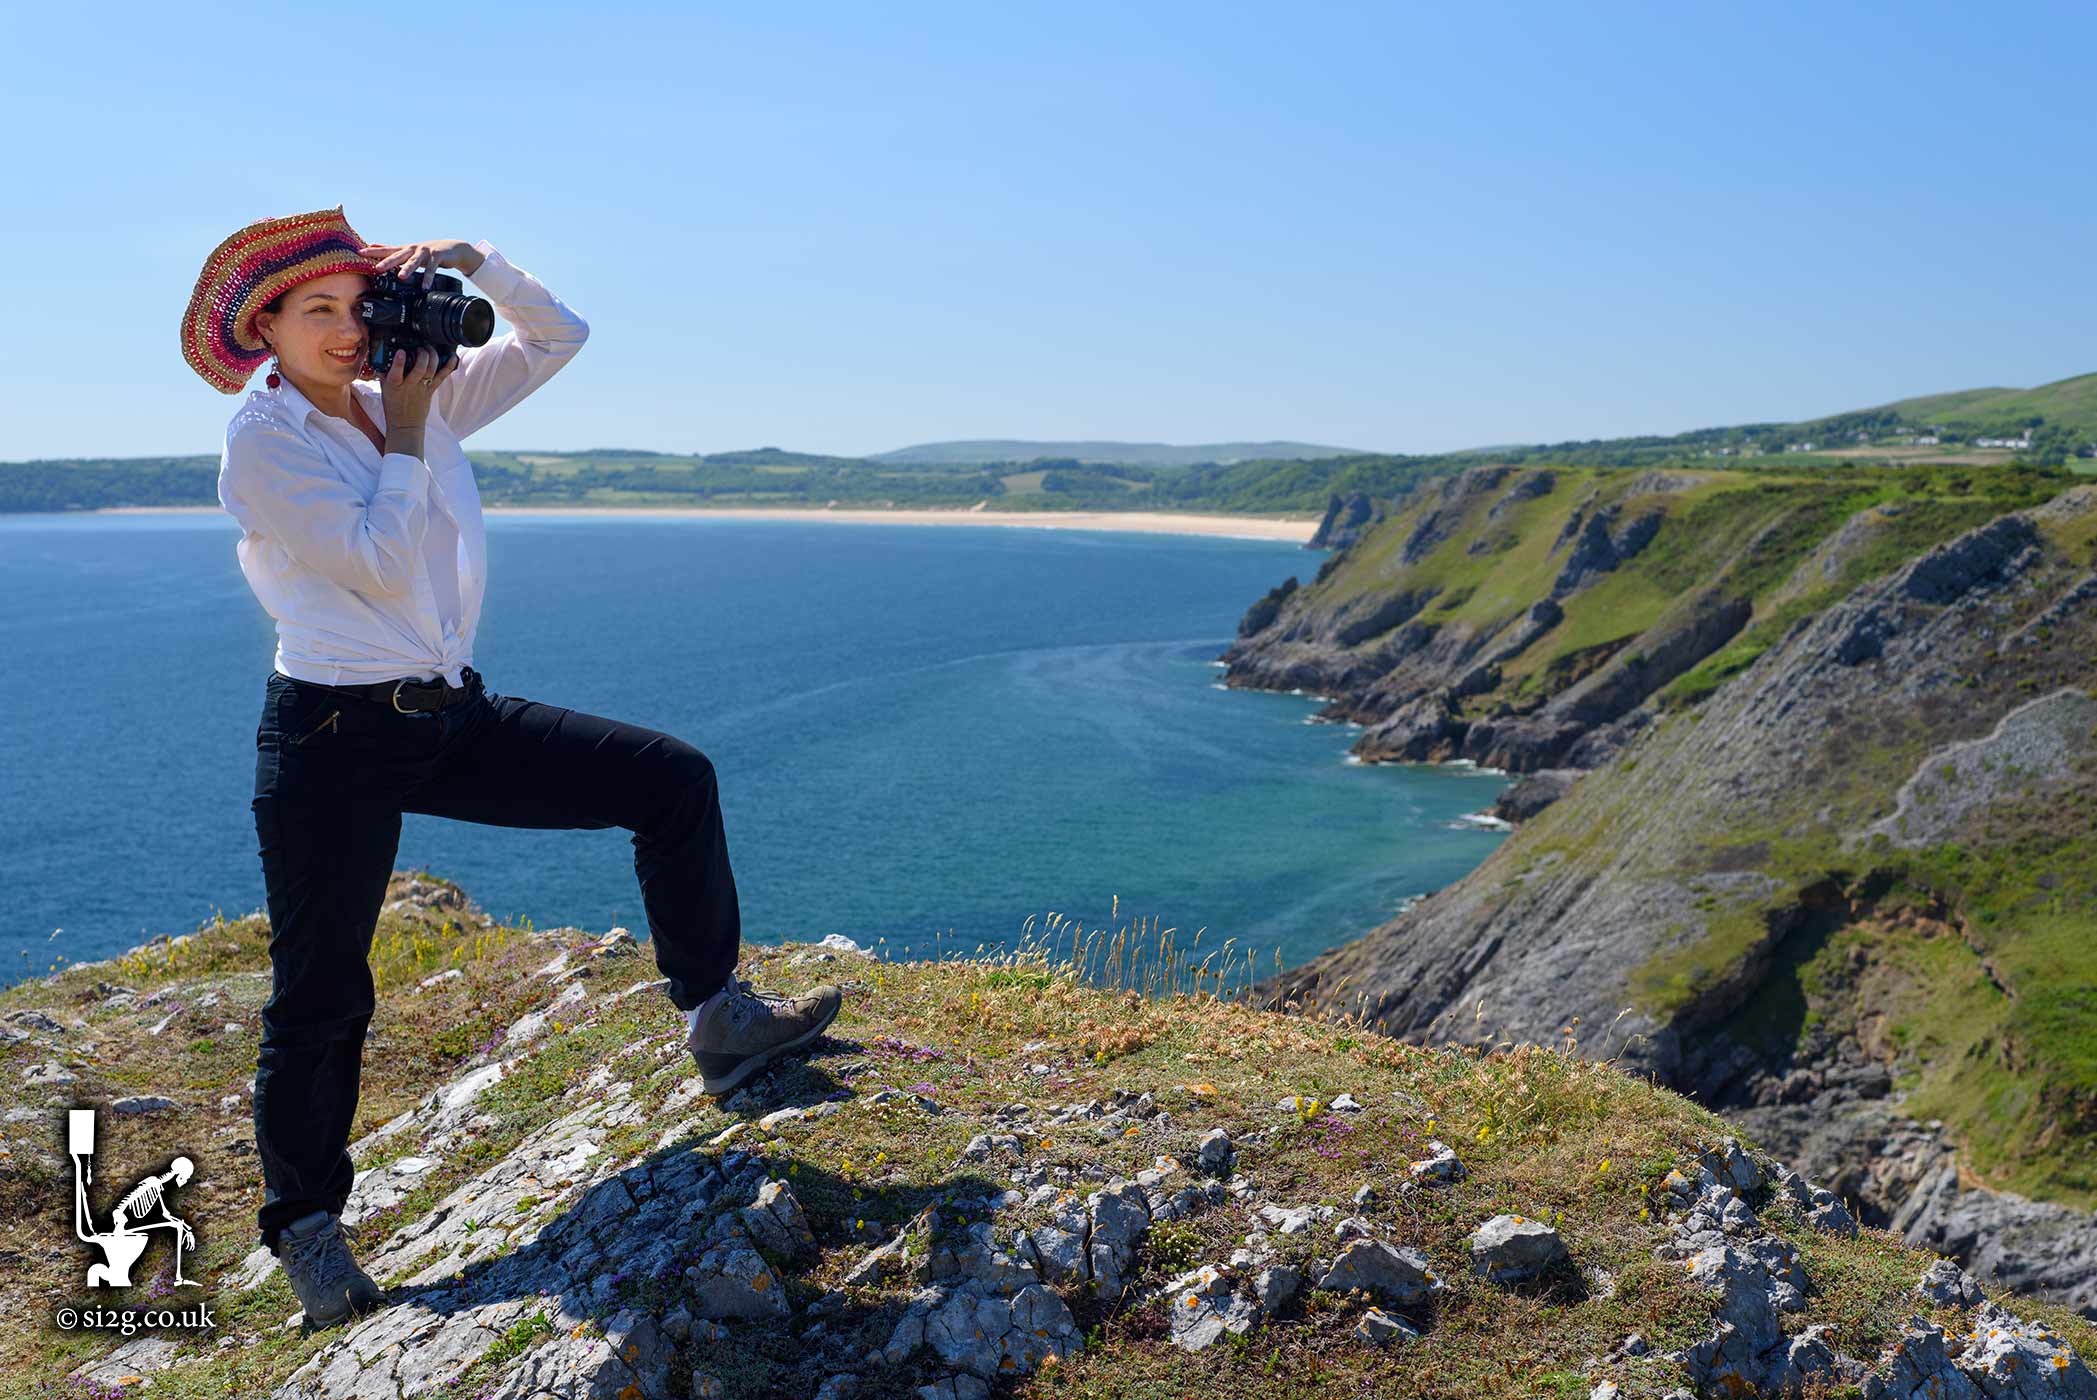 Sun, Sea and Sand - The Welsh coastal path is interesting and diverse.  This beautiful cliff-top location is on the Gower Peninsular.  A tourist can be seen taking a photograph with Oxwich Bay in the distance.